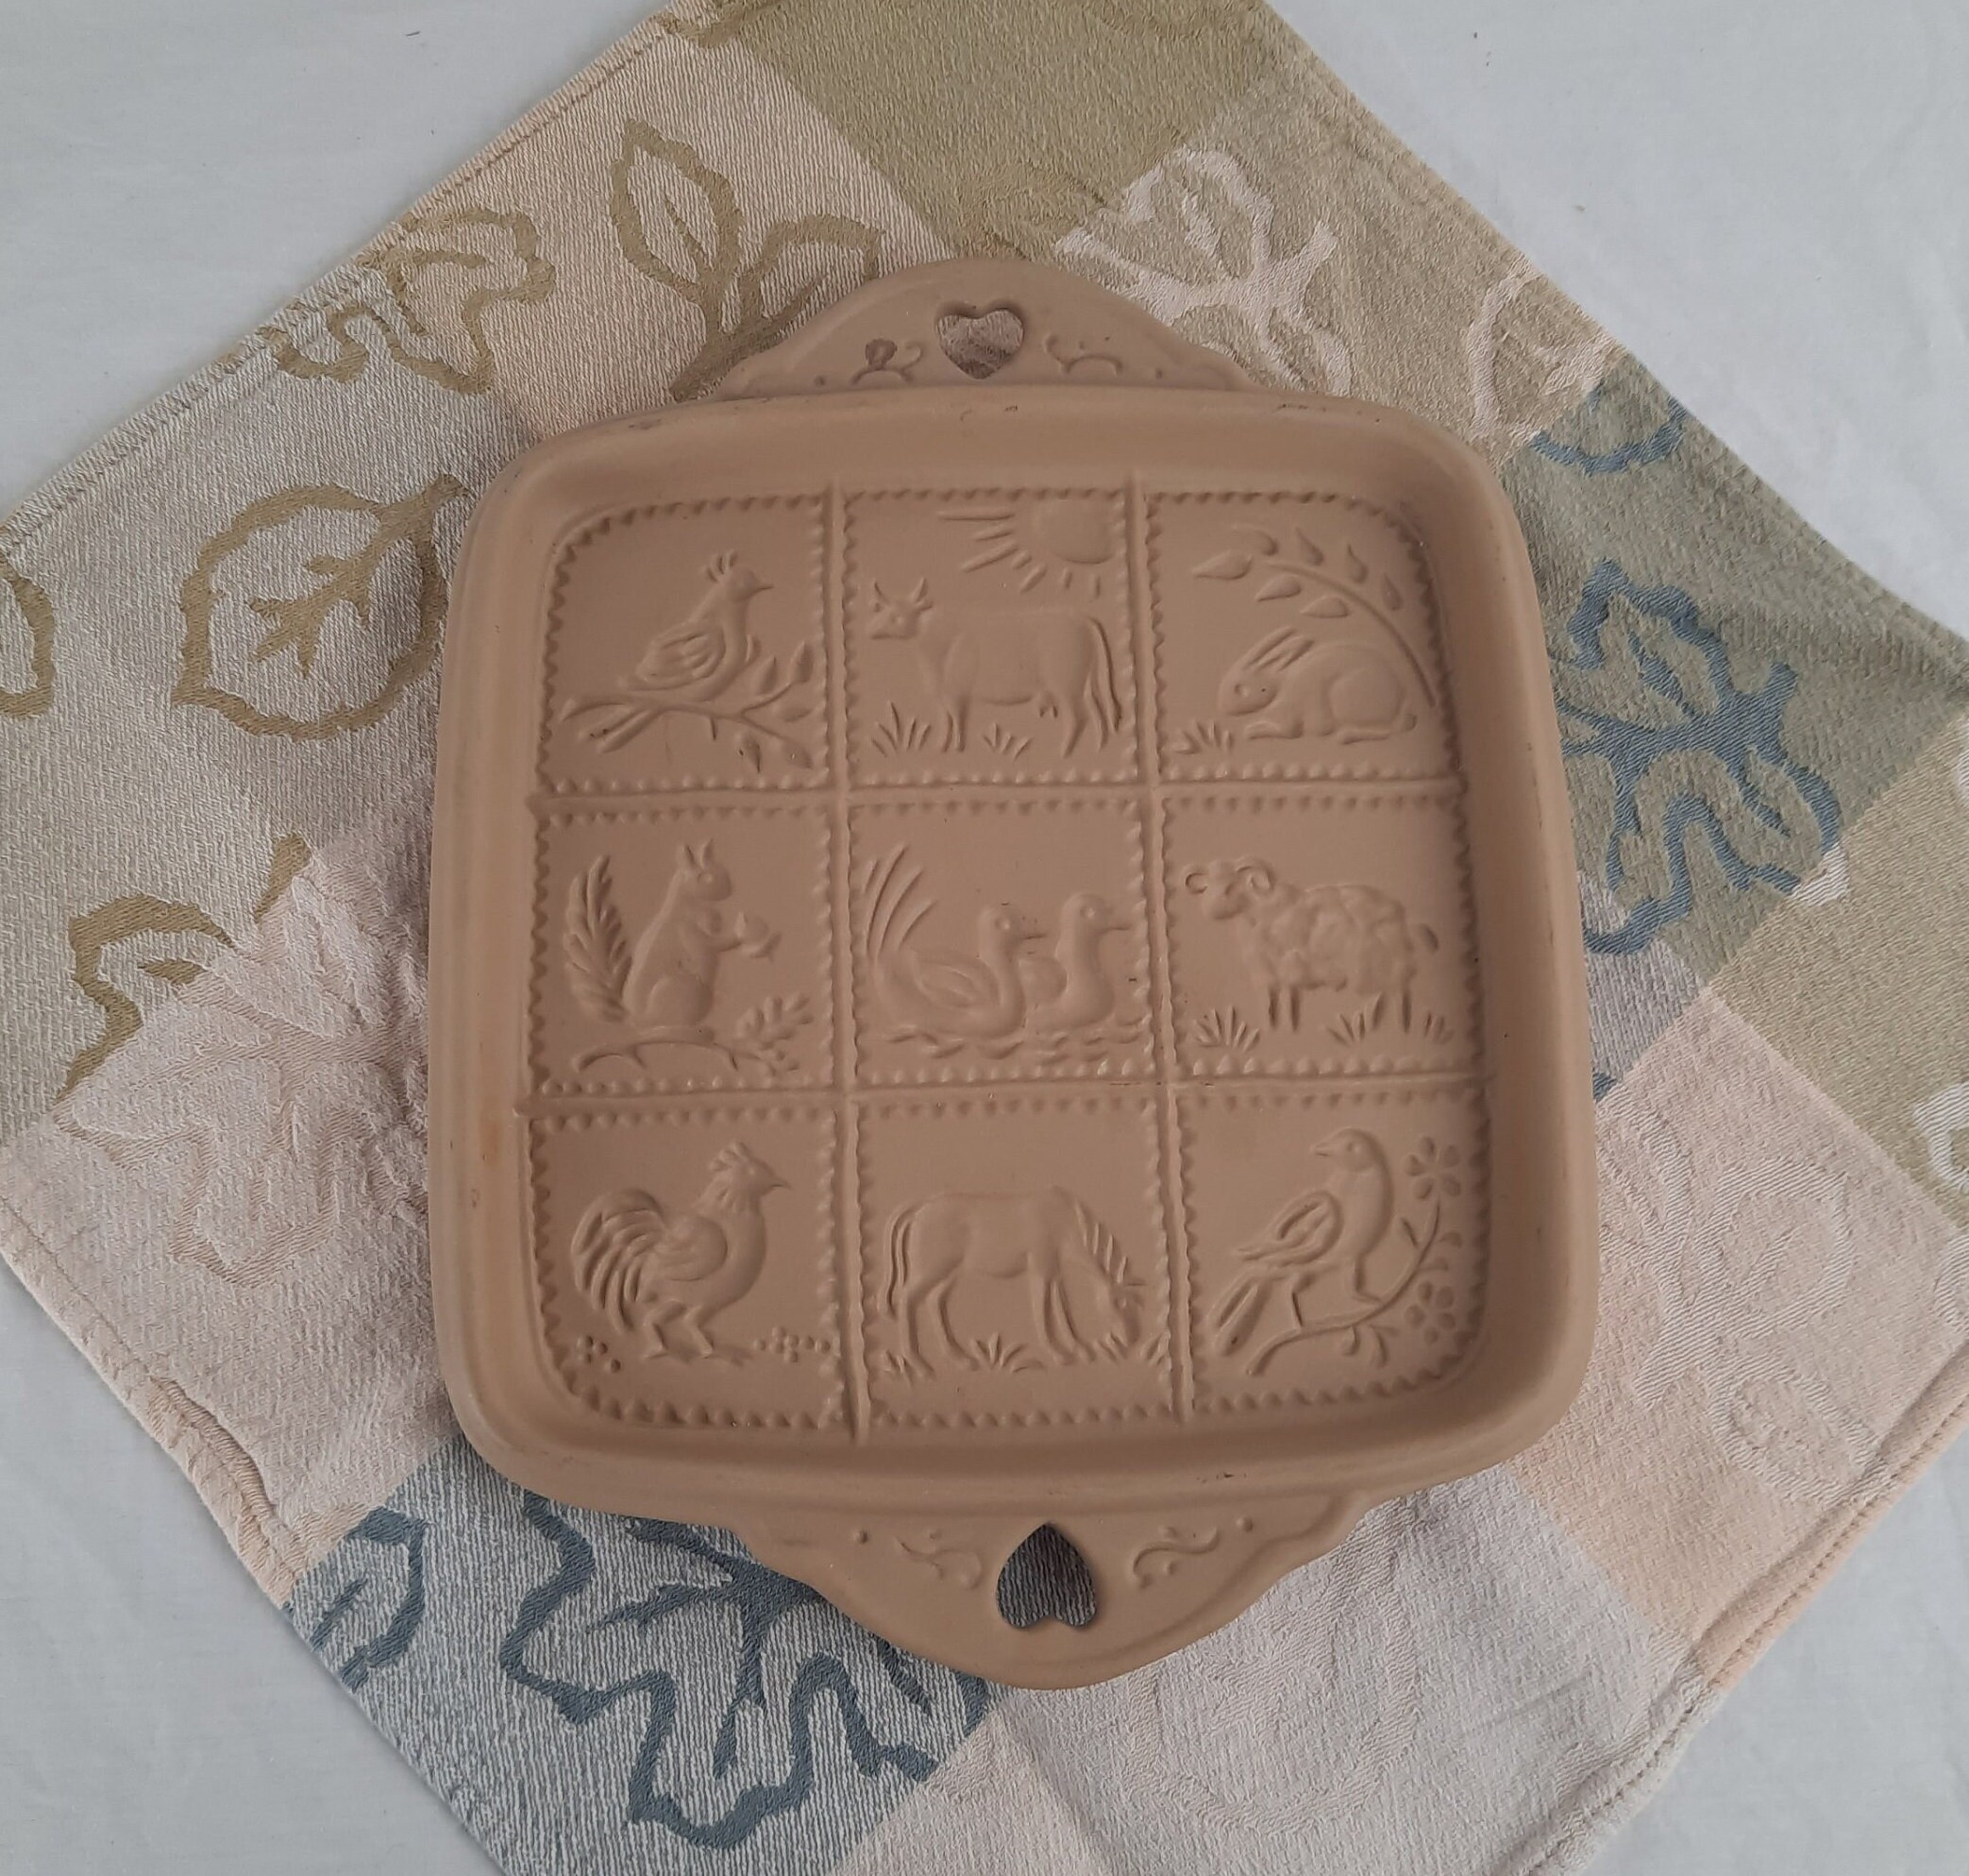 Traditional moulded shortbread – using my Mum's shortbread mould